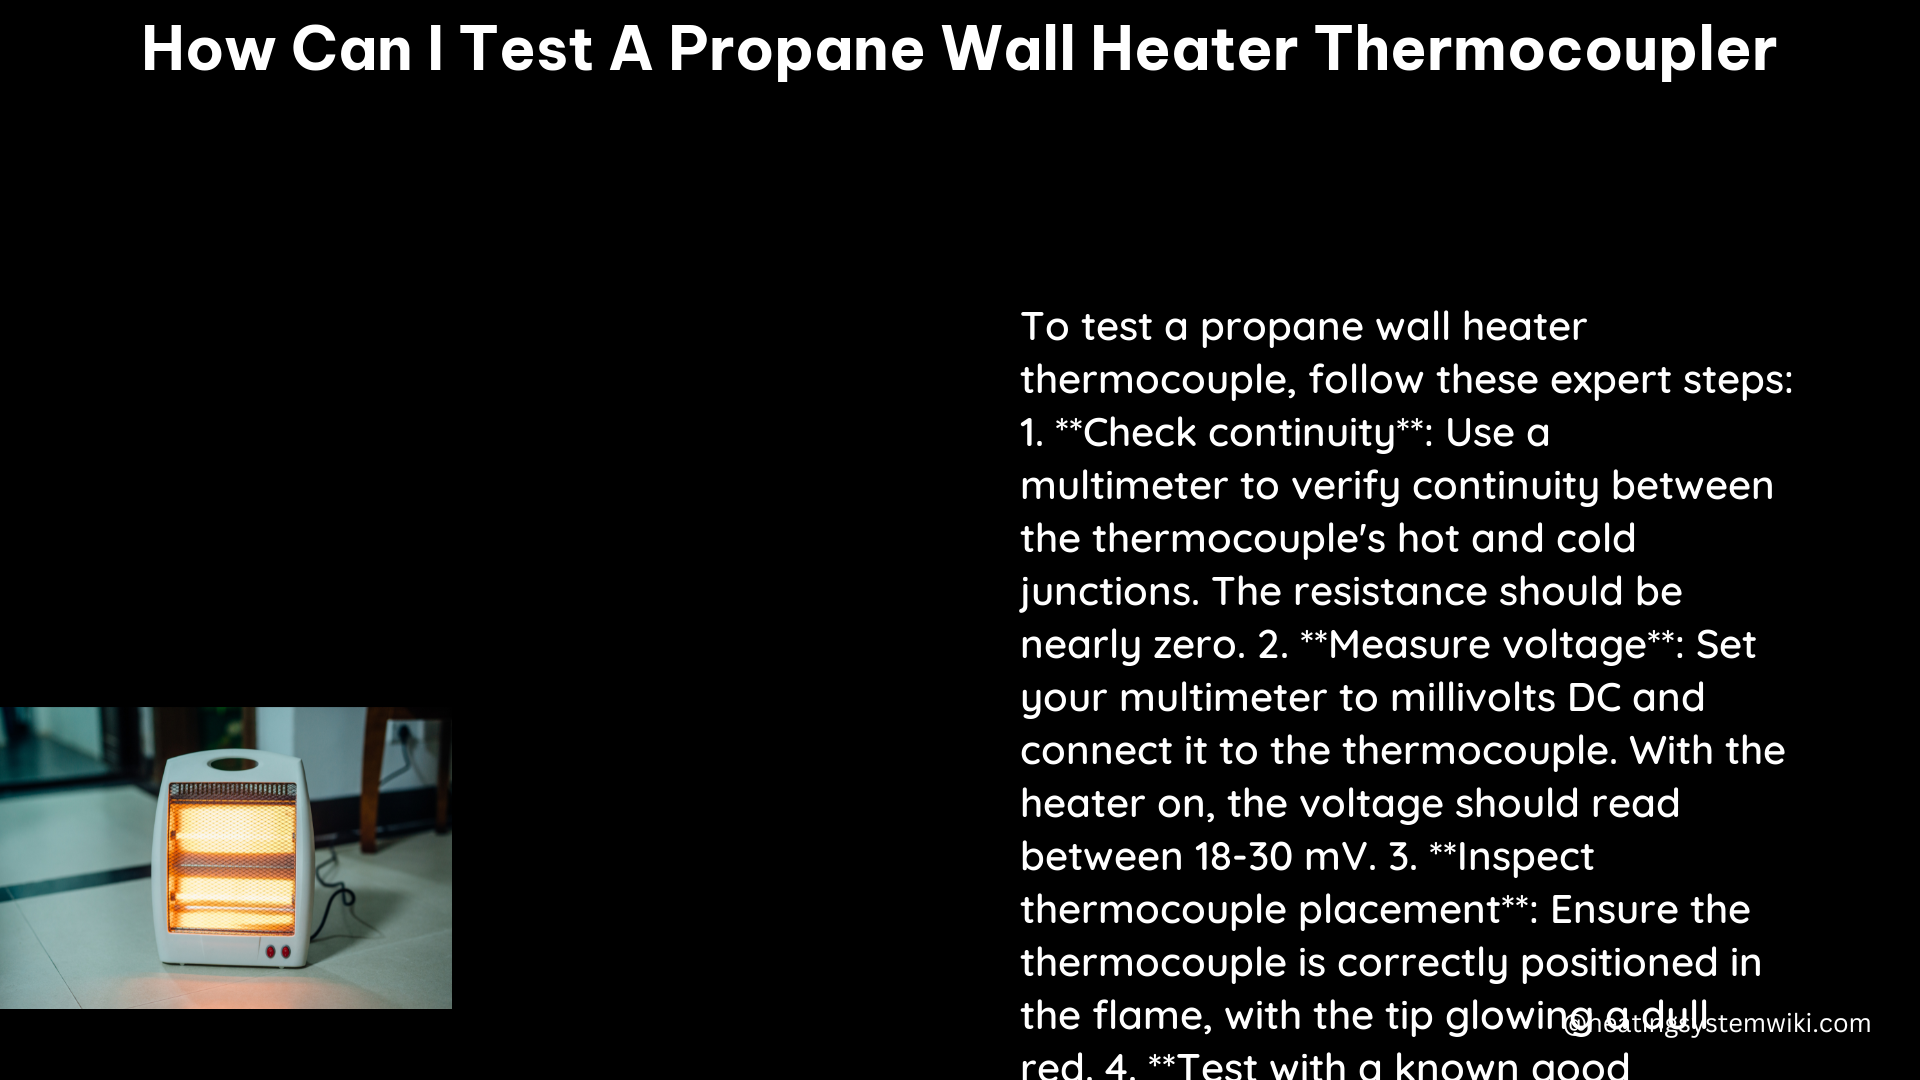 how can i test a propane wall heater thermocoupler